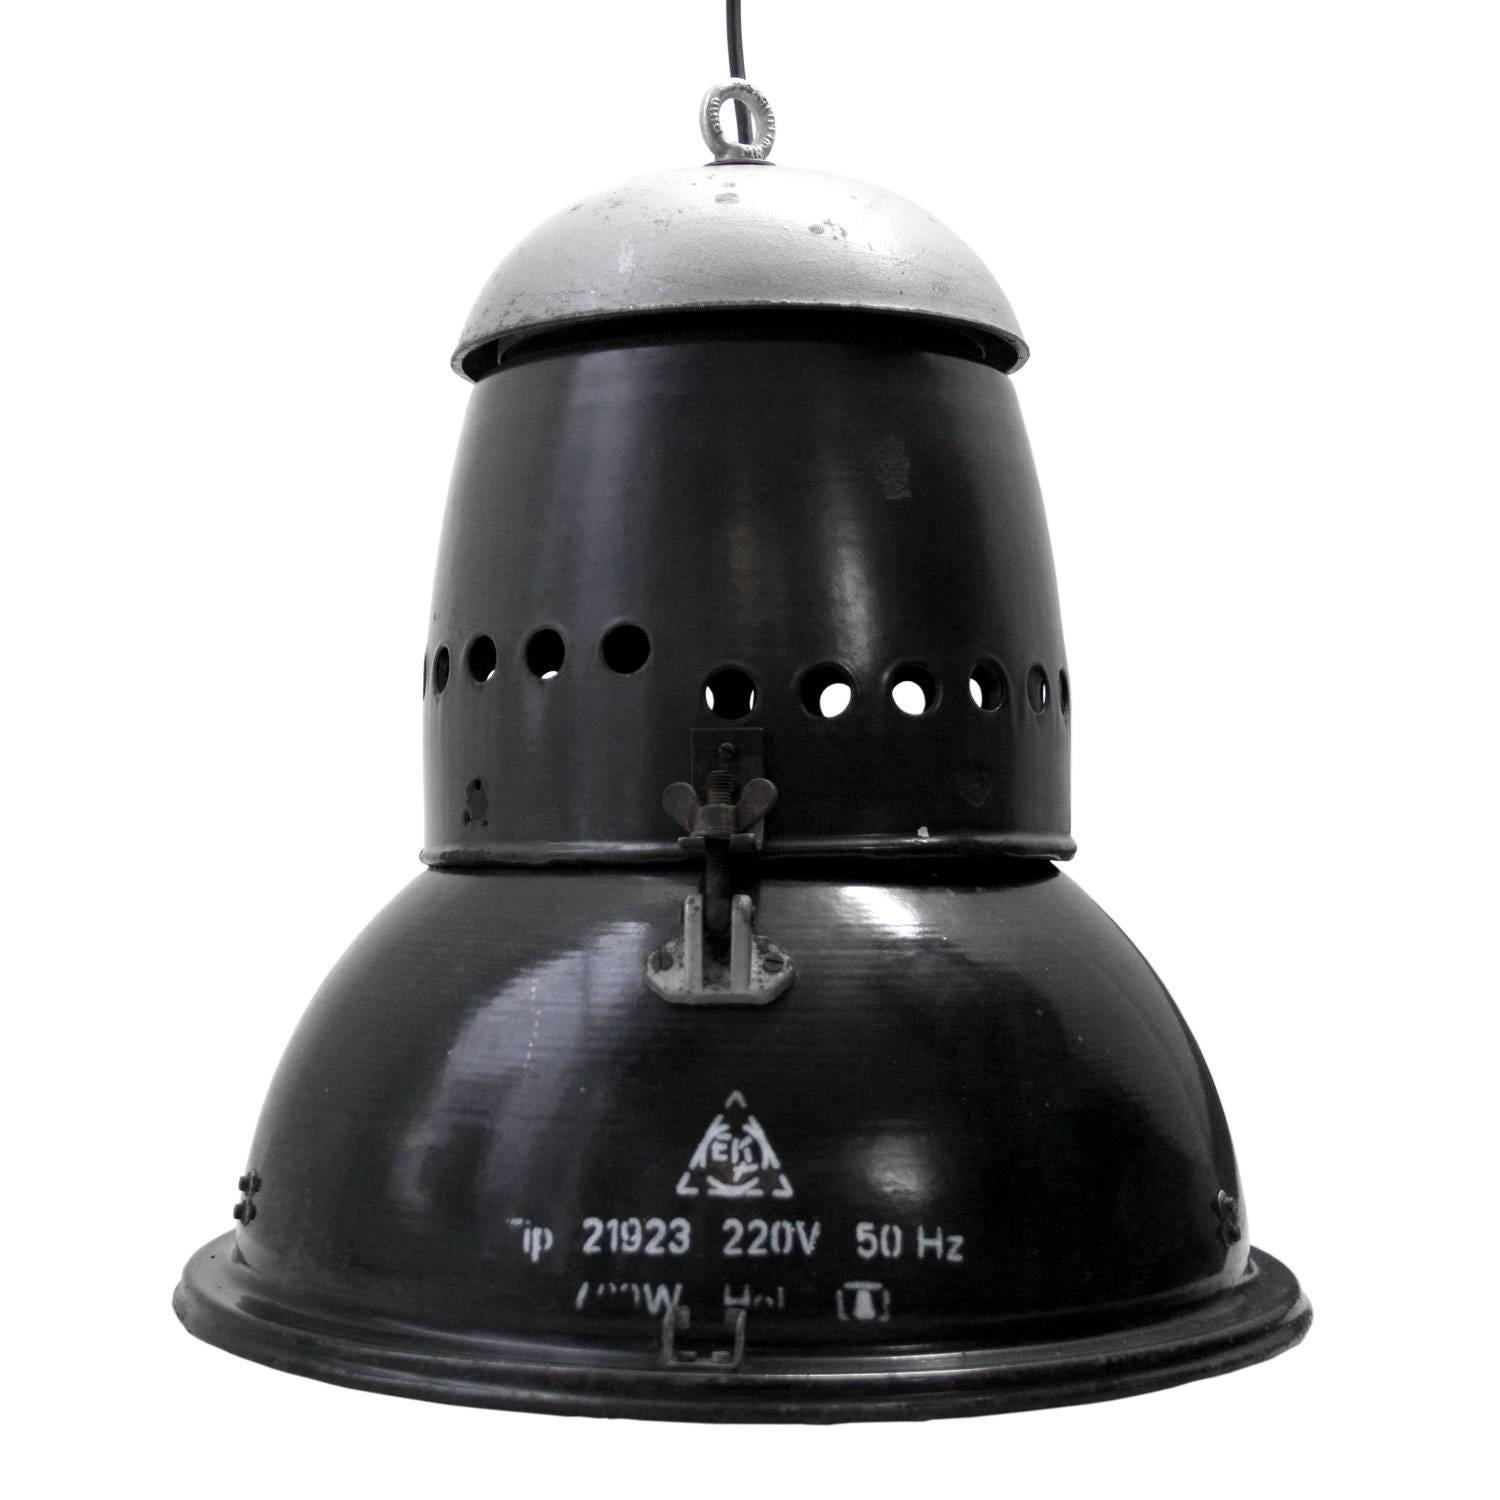 dark blue enamel Industrial lamp. White interior cast iron top.

Measures: Weight 7.5 kg / 16.5 lb

All lamps have been made suitable by international standards for incandescent light bulbs, energy-efficient and LED bulbs. E26 / E27 bulb holders and